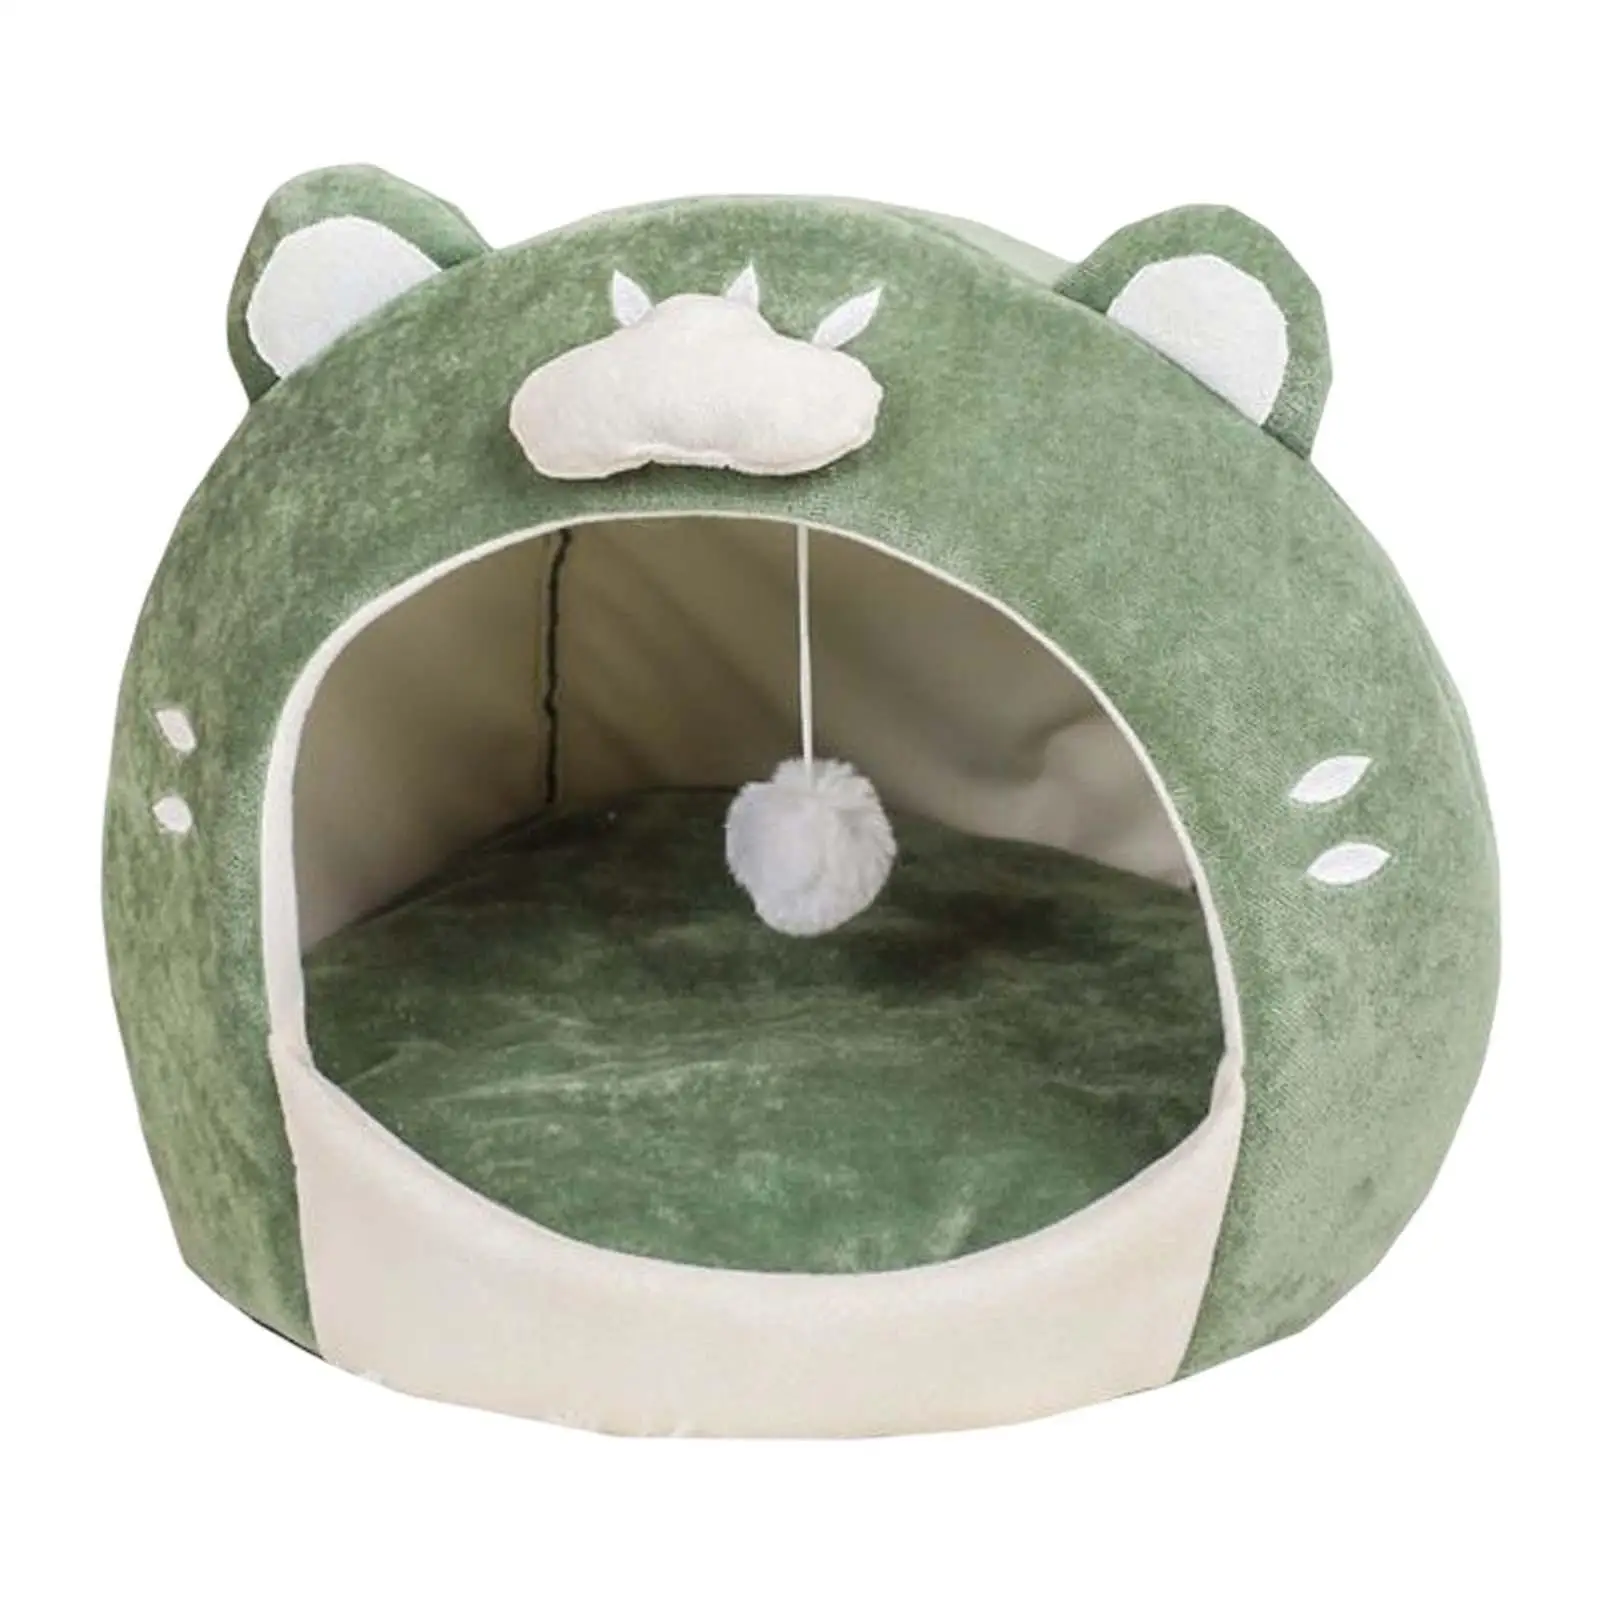 Kittens Cat Bed Covered Semi Enclosed Cat Tent Sleeping House Anti Slip Base Removable Cushion Lightweight Durable Easily Clean